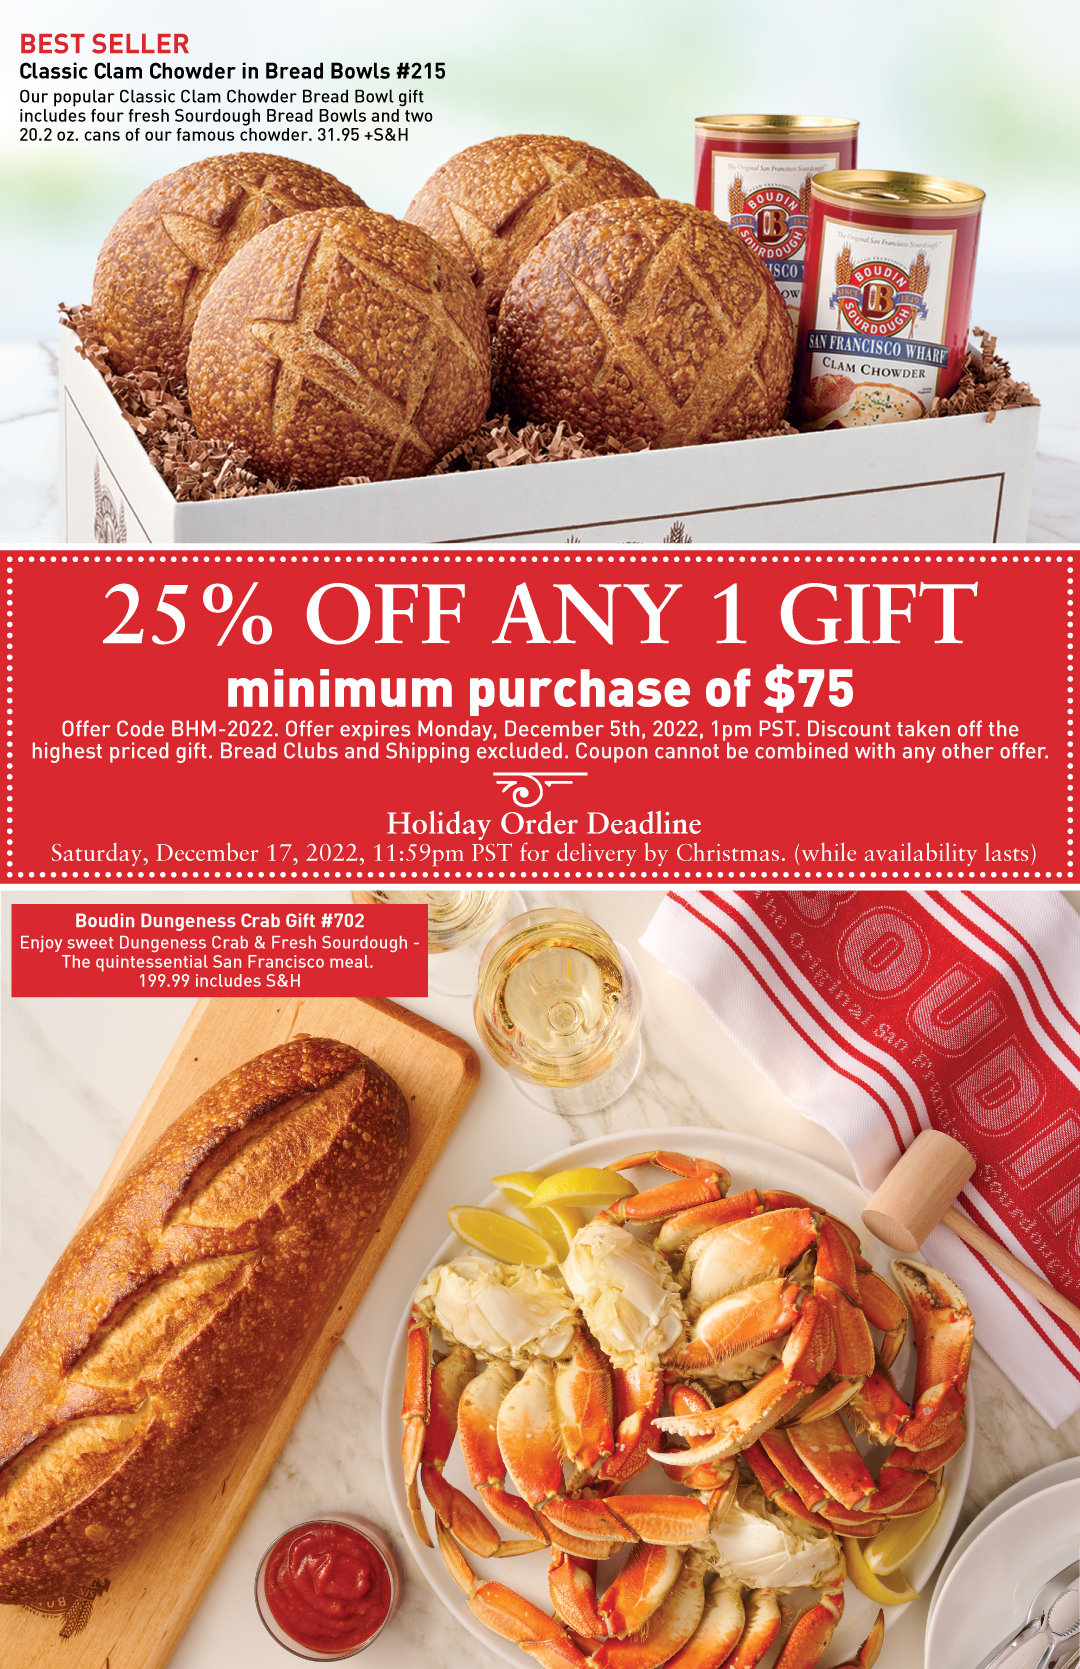 Classic Clam Chowder in Bread Bowls #215 with sourdough bread bowls and clam chowder in a box and priced at 31.95 +S&H. 25% OFF Any 1 Gift with minimum purchase of $75 with offer code BHM-2022. Offer expires Monday, December 5th, 2022, 1pm PST. Discount taken off the highest priced gift. Bread Clubs and Shipping excluded. Coupon cannot be combined with any other offer. Boudin Dungeness Crab Gift #702 with Sourdough Long Loaf and Crab on marble surface and priced at 199.99 includes S&H.